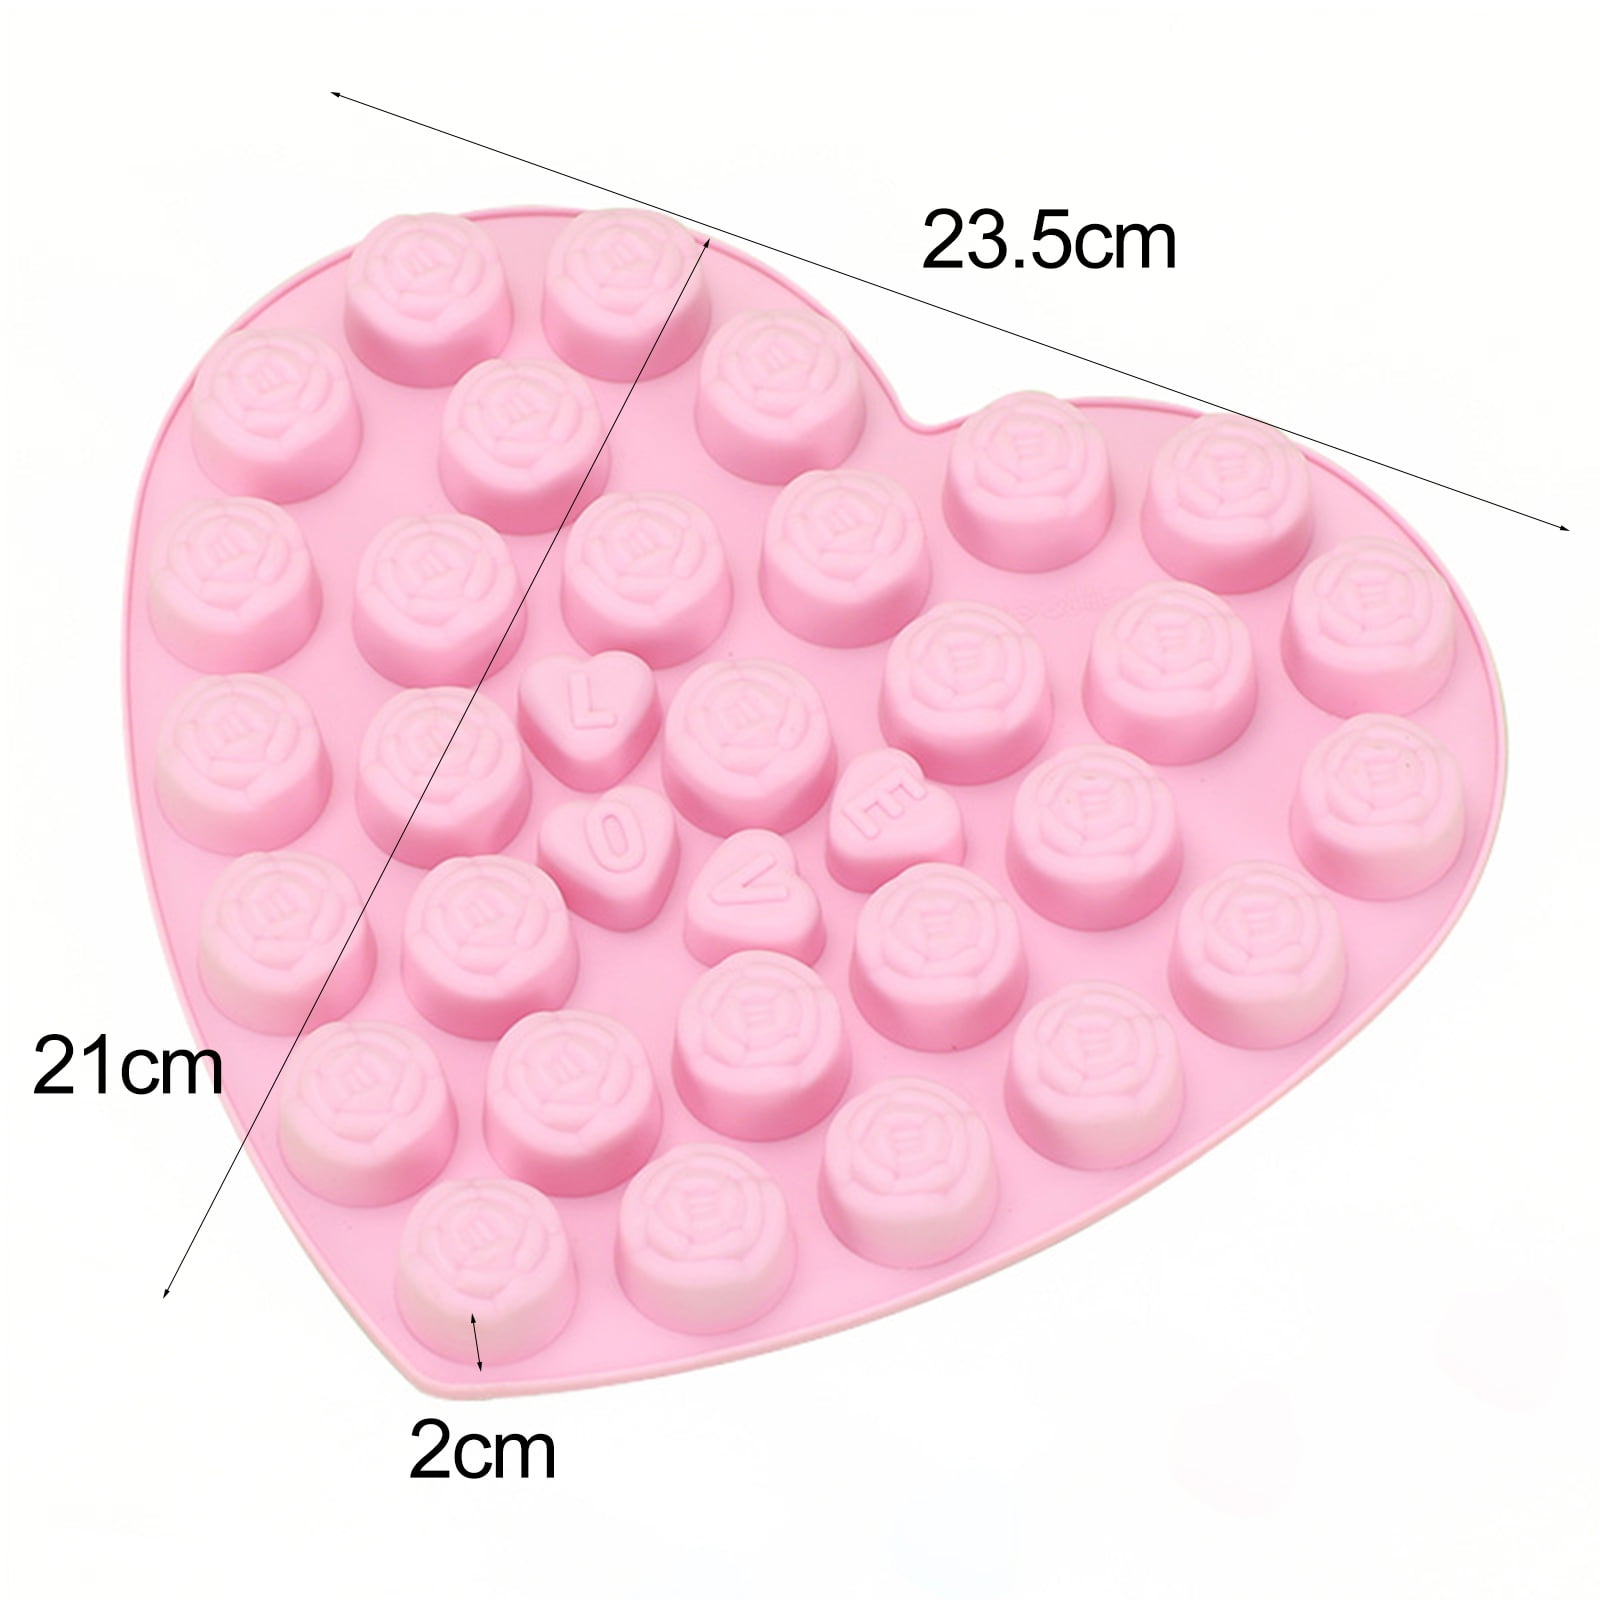 Genericaa 2 Pack Chocolate Silicone Molds Candy Mold, Rose Flower Shape Baking Mold Candy Molds BPA Free & Non-Stick Silicone Tray for Hard Candy Gummy Bomb